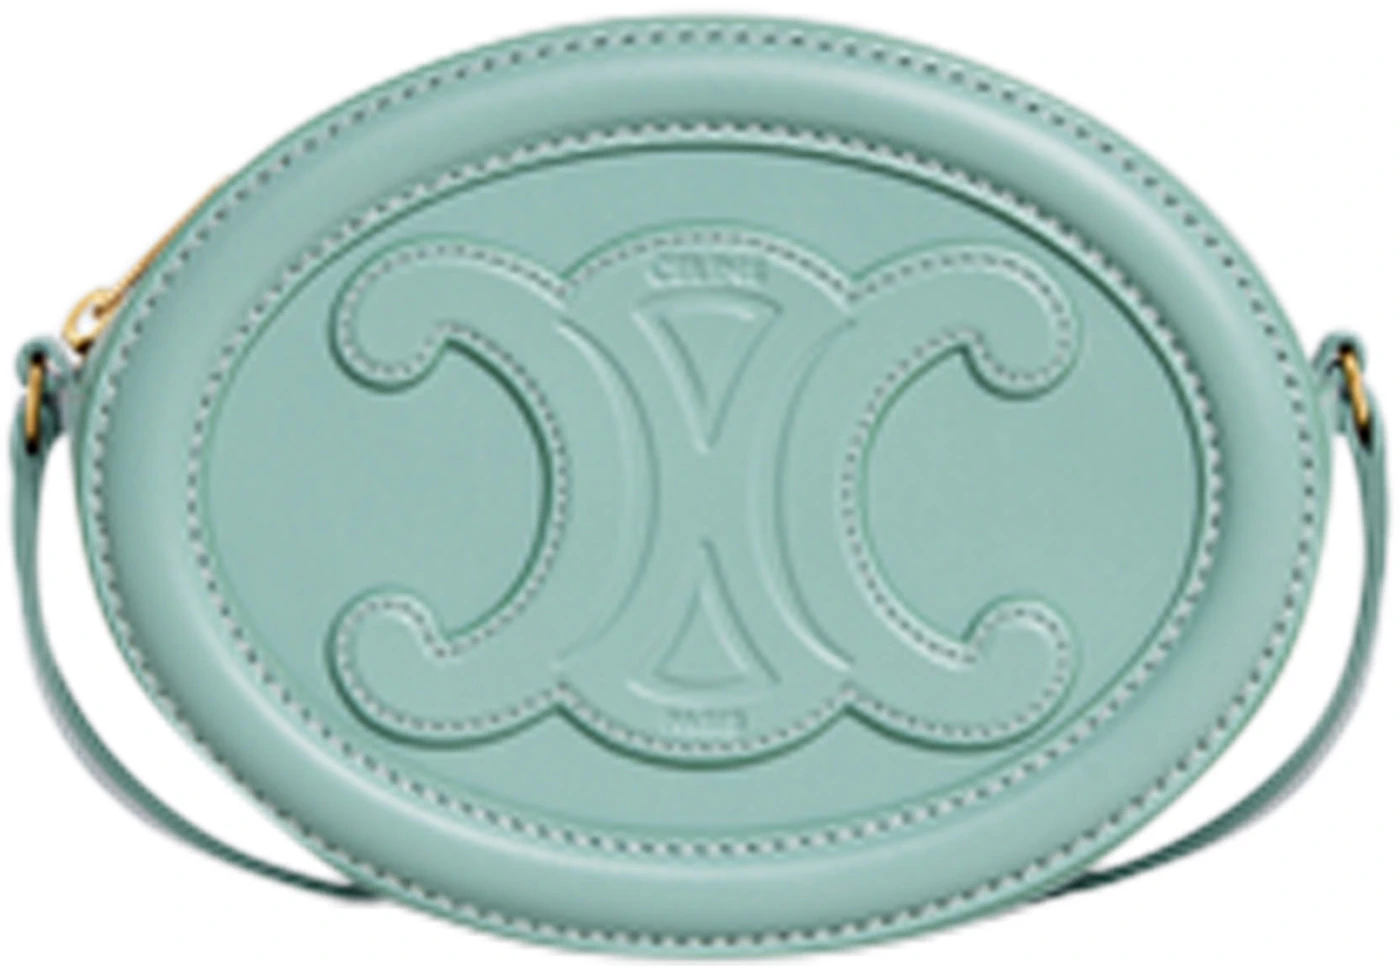 Celine Crossbody Oval Cuir Purse Triomphe Embroidery Ice Mint in